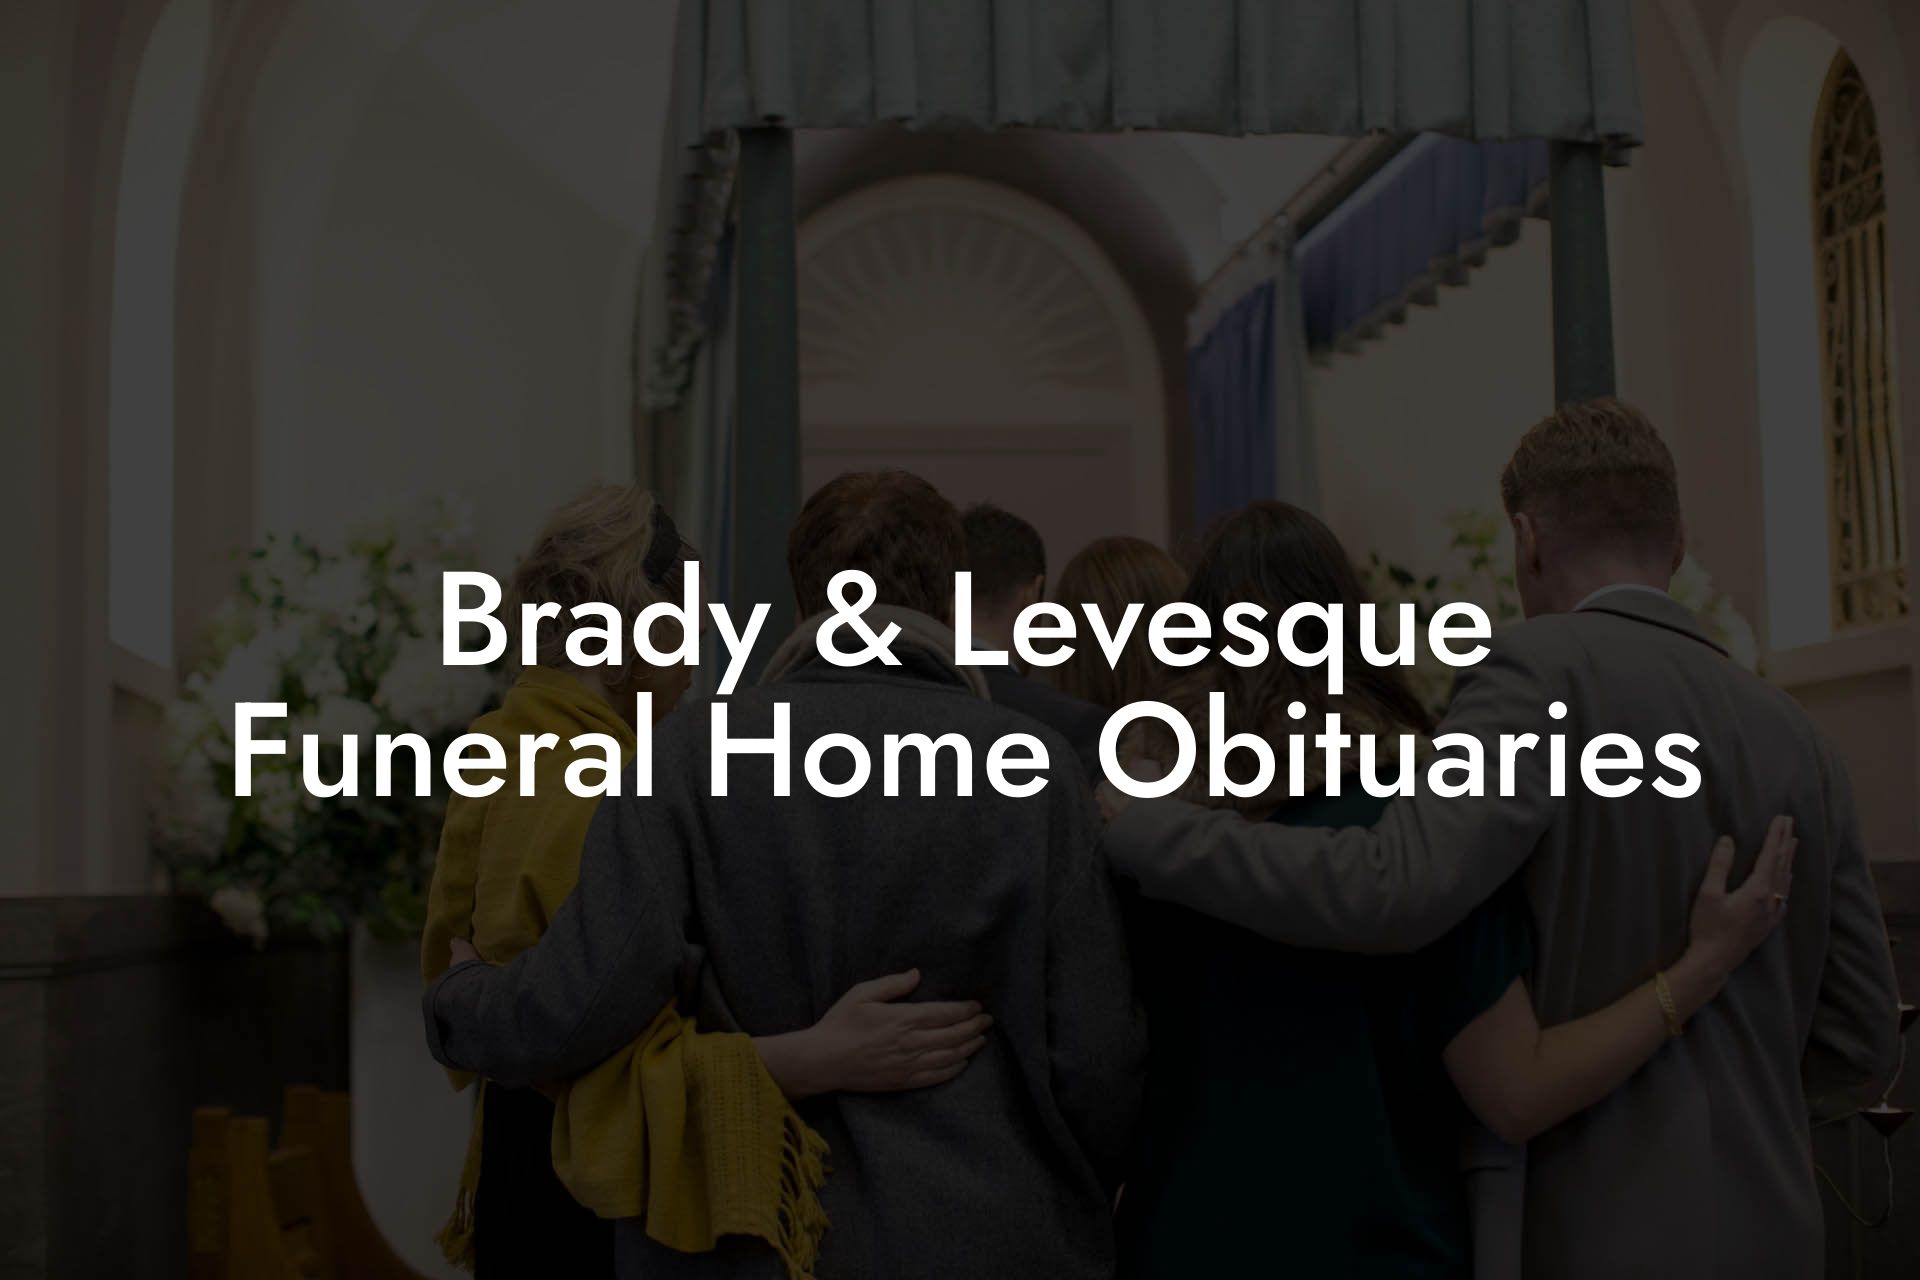 Brady & Levesque Funeral Home Obituaries